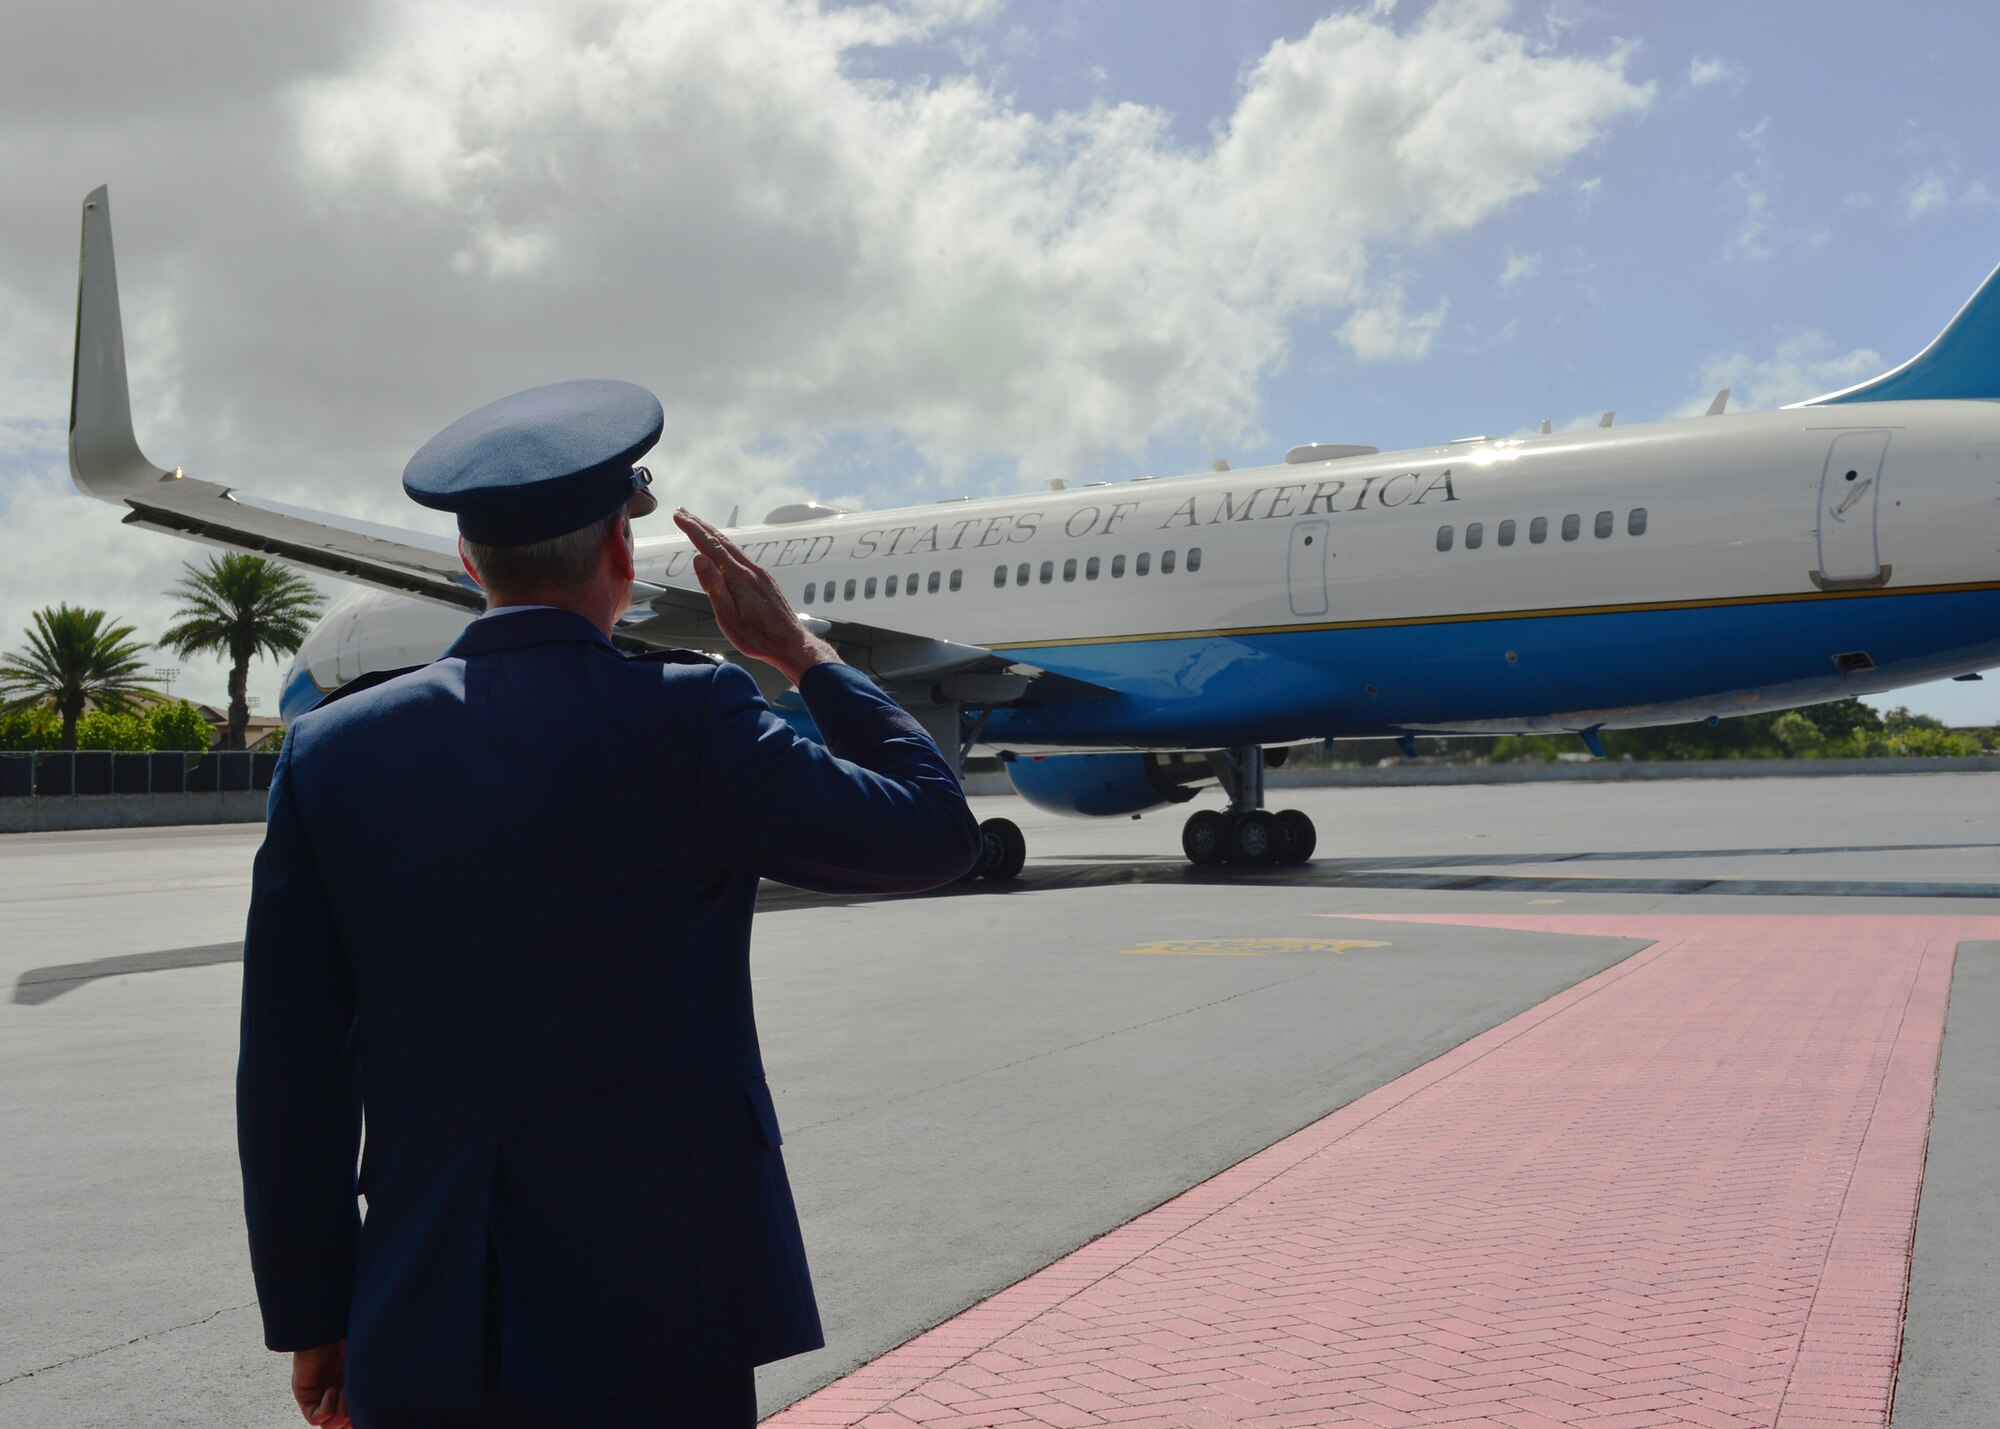 Gen. Terrence O’Shaughnessy, Pacific Air Forces commander, salutes Air Force One as it taxis on Joint Base Pearl Harbor-Hickam, Hawaii, Sep. 1, 2016. President Barack Obama was in Hawaii to speak at the Pacific Island Conference of Leaders and the International Union for Conservation of Nature World Conservation Congress. President Obama departed JBPHH on his way to Midway Atoll. (U.S. Air Force Photo by Tech. Sgt. Aaron Oelrich/Released)